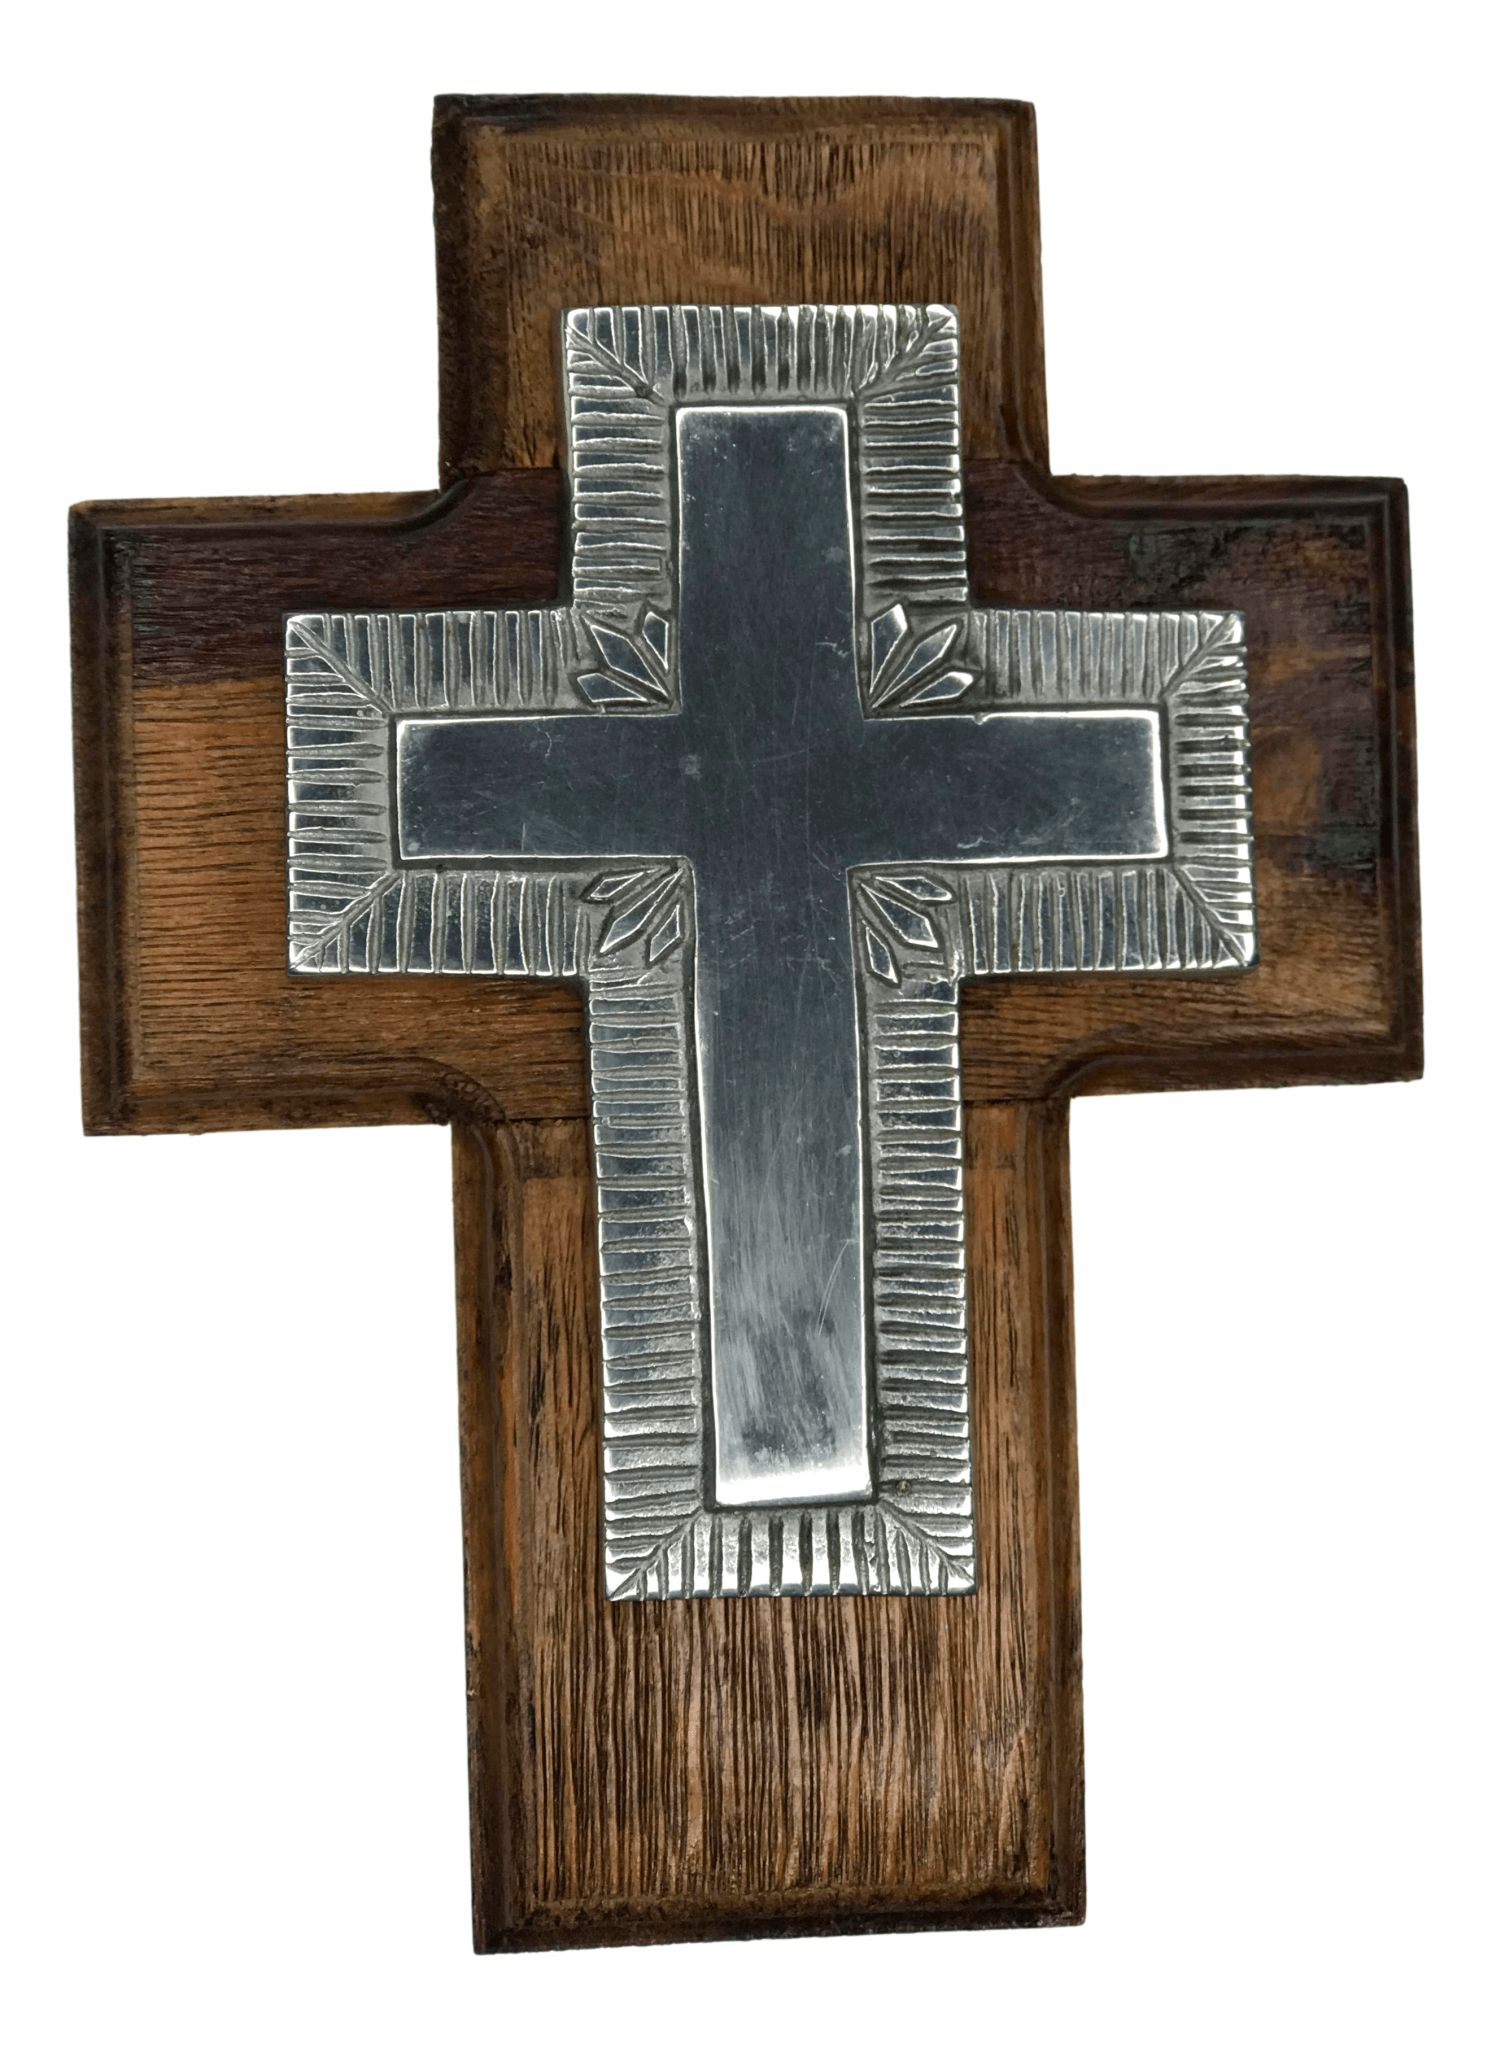 Cross Wood Pweter H:10.5 inches X W: 7.5 inches - Ysleta Mission Gift Shop- VOTED 2022 El Paso's Best Gift Shop